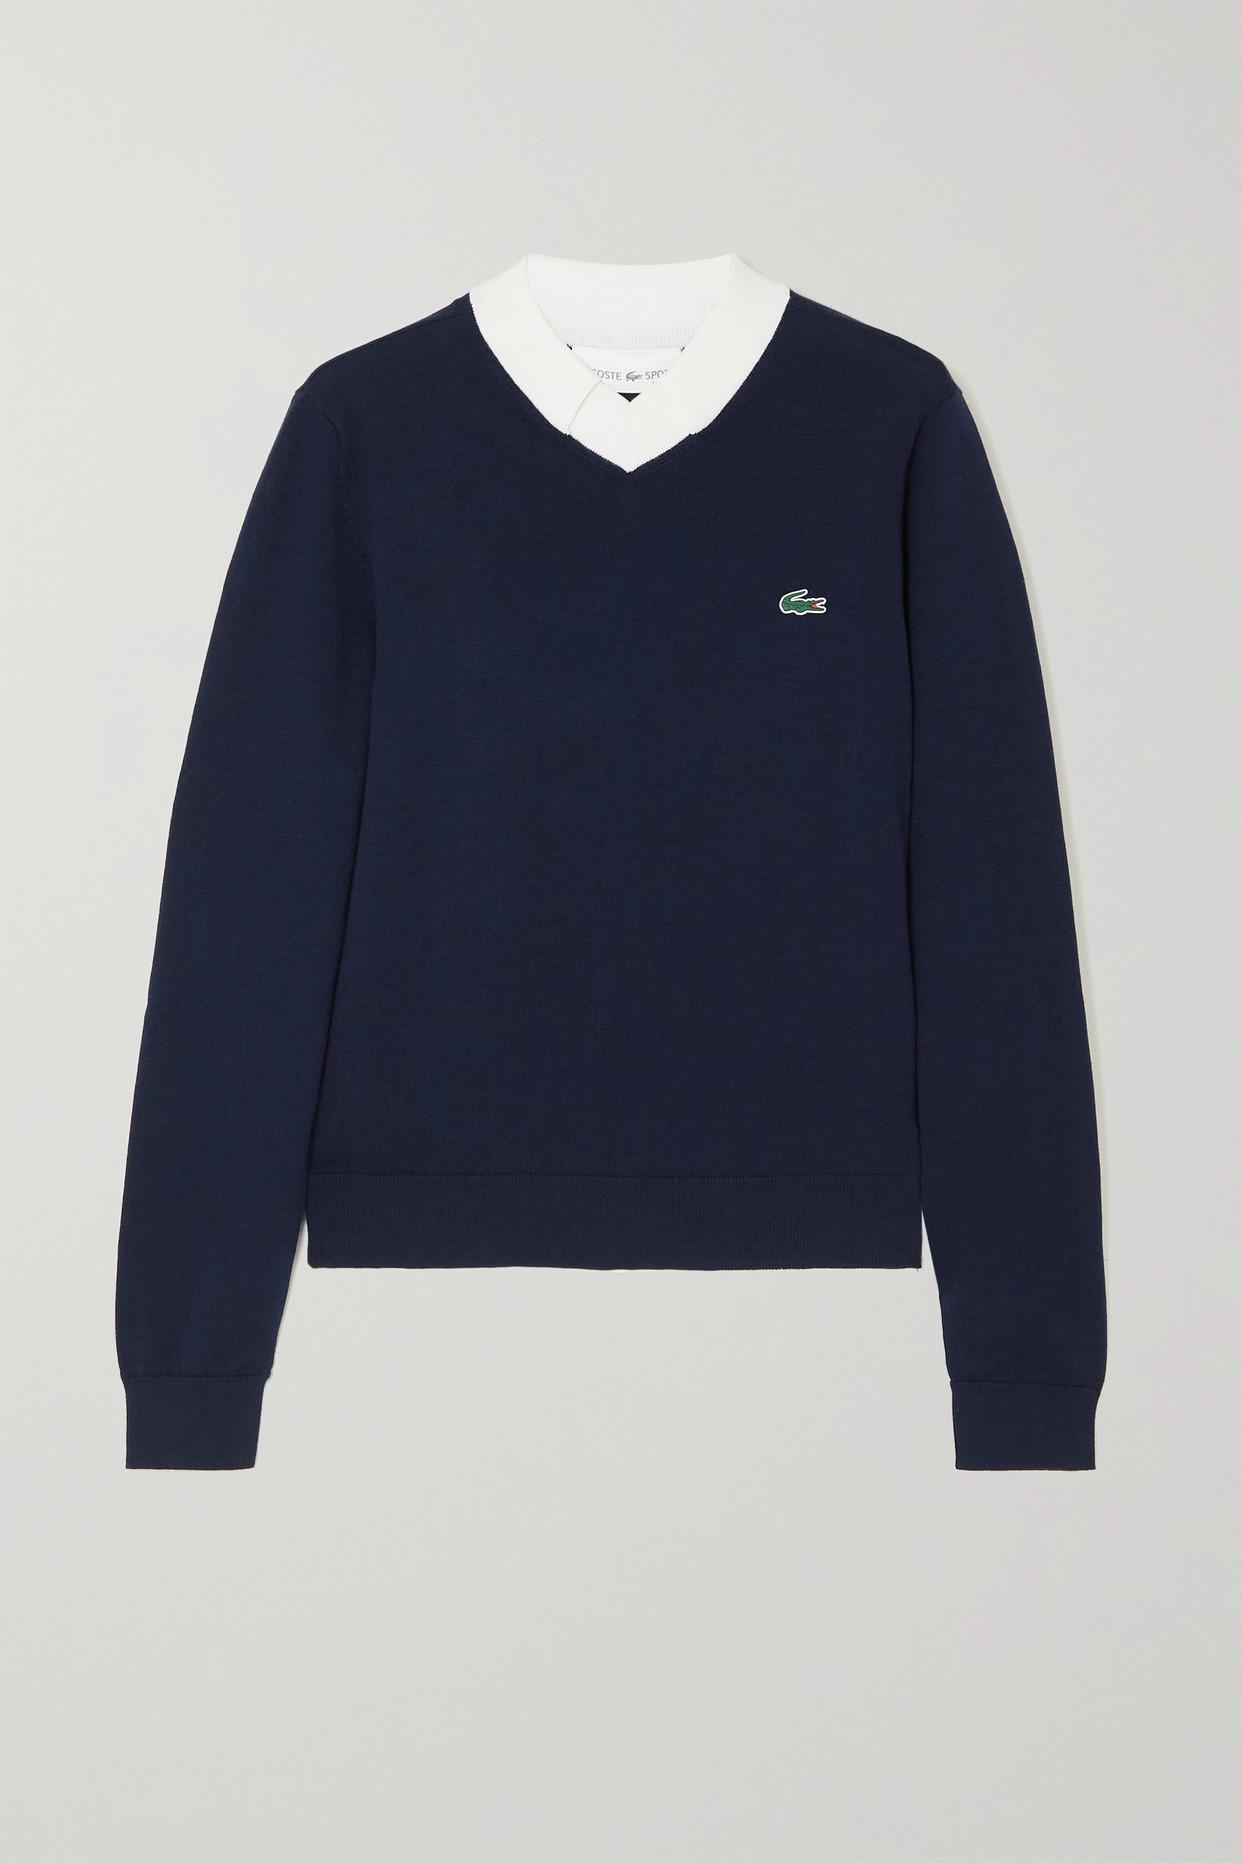 Lacoste Layered Cotton-blend Golf Sweater in Blue | Lyst